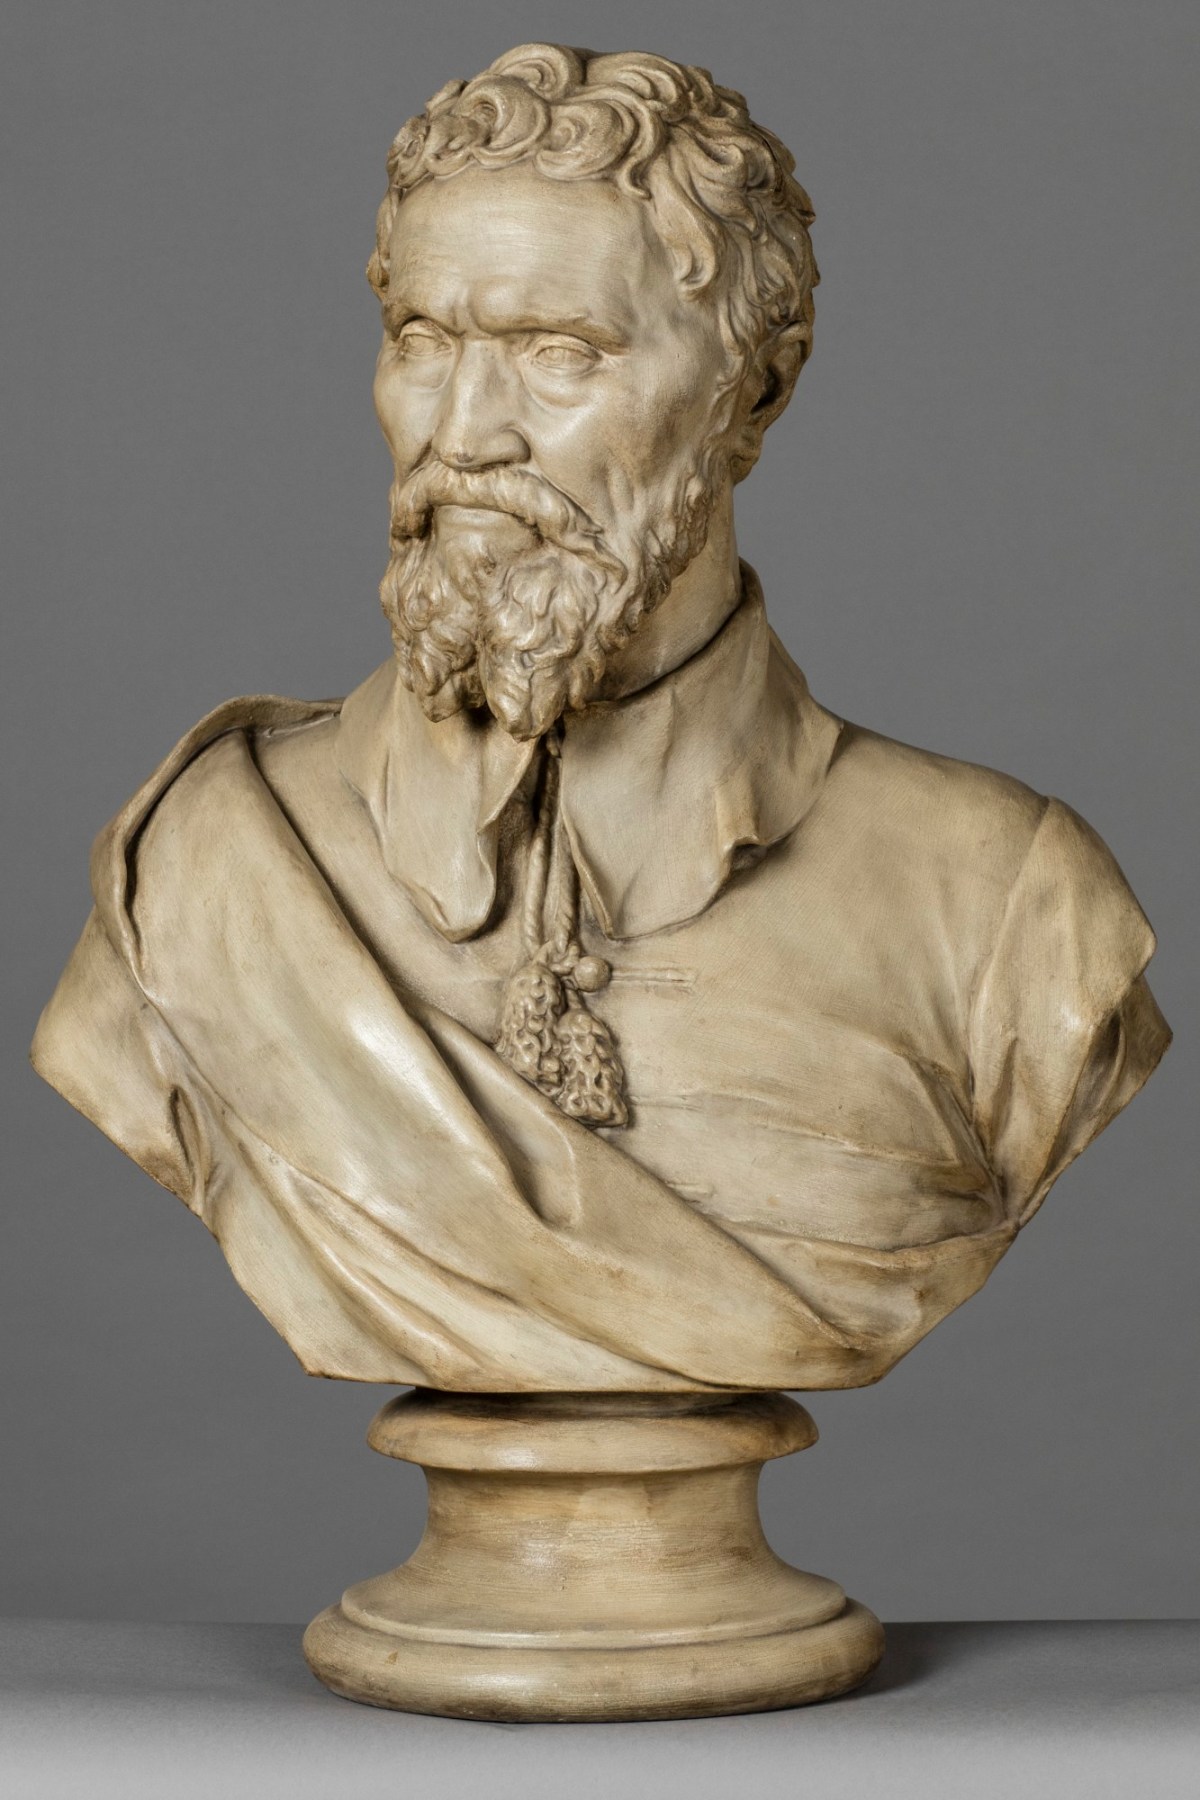 Cast of a bust of Michelangelo, Works of Art